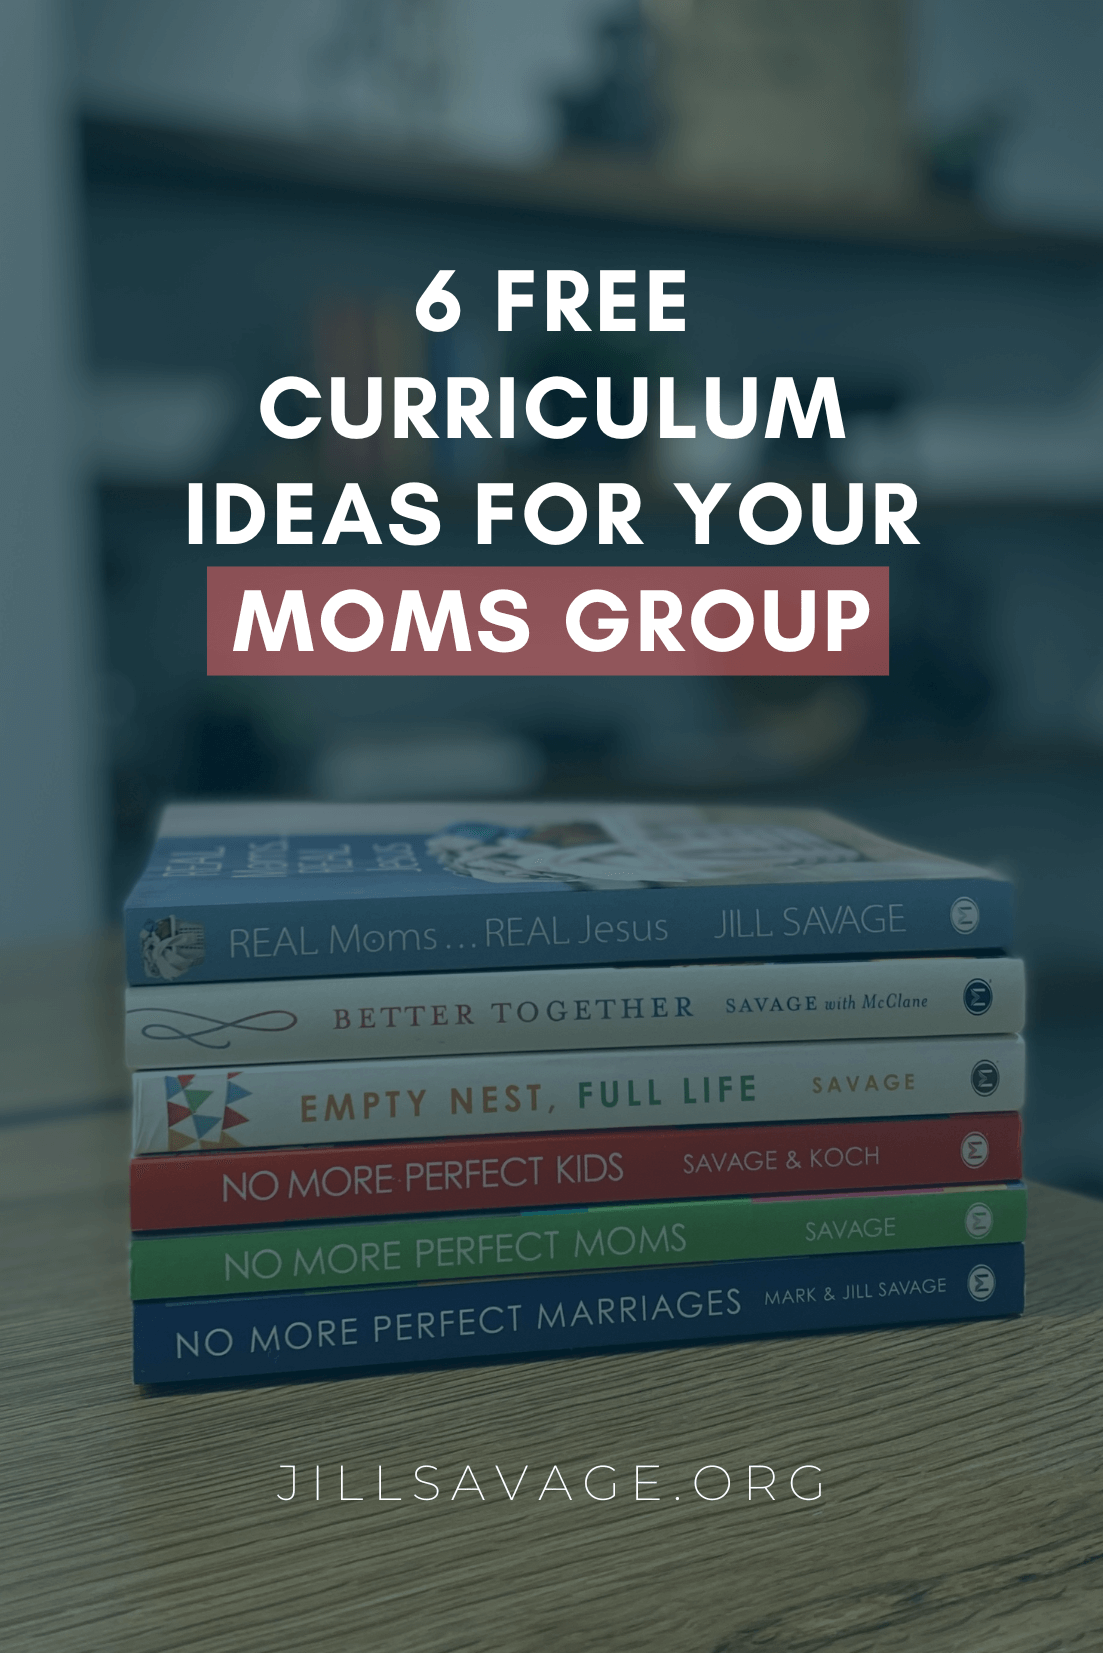 6 Free Curriculum Ideas for Your Moms Group